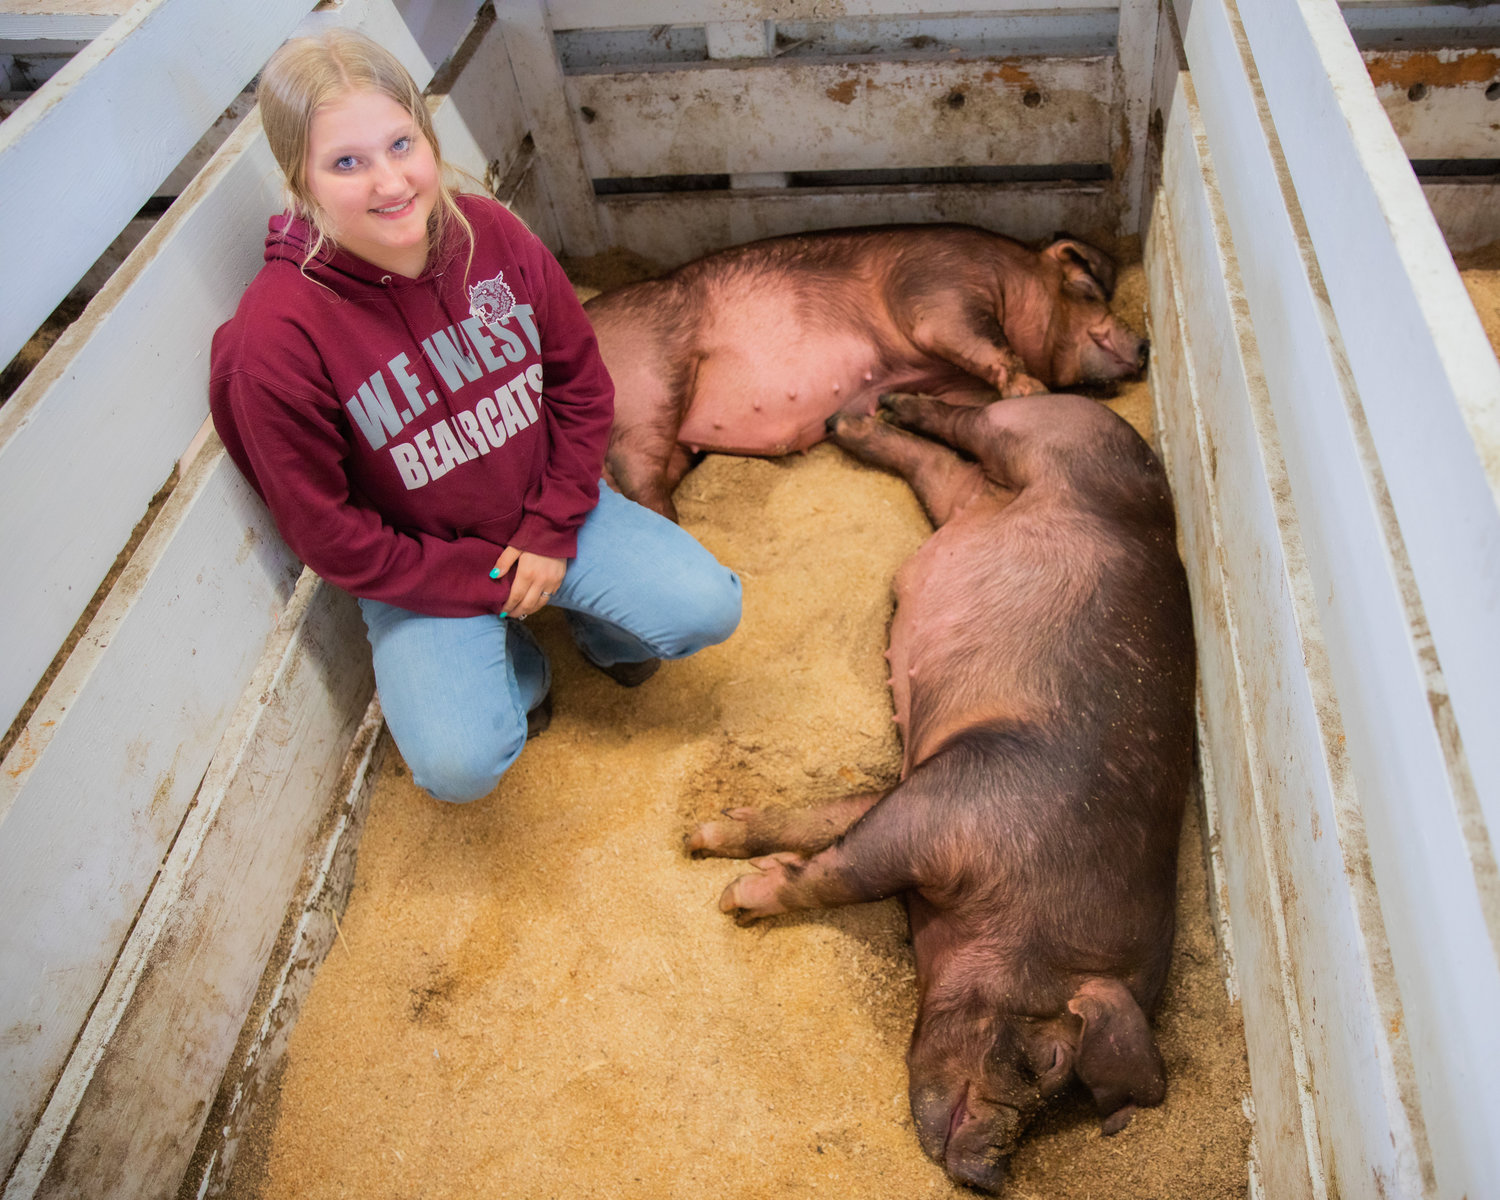 Logan Nailoon, 13, smiles for a photo alongside pigs in a pen Monday afternoon at the Southwest Washington Fairgrounds in Centralia.